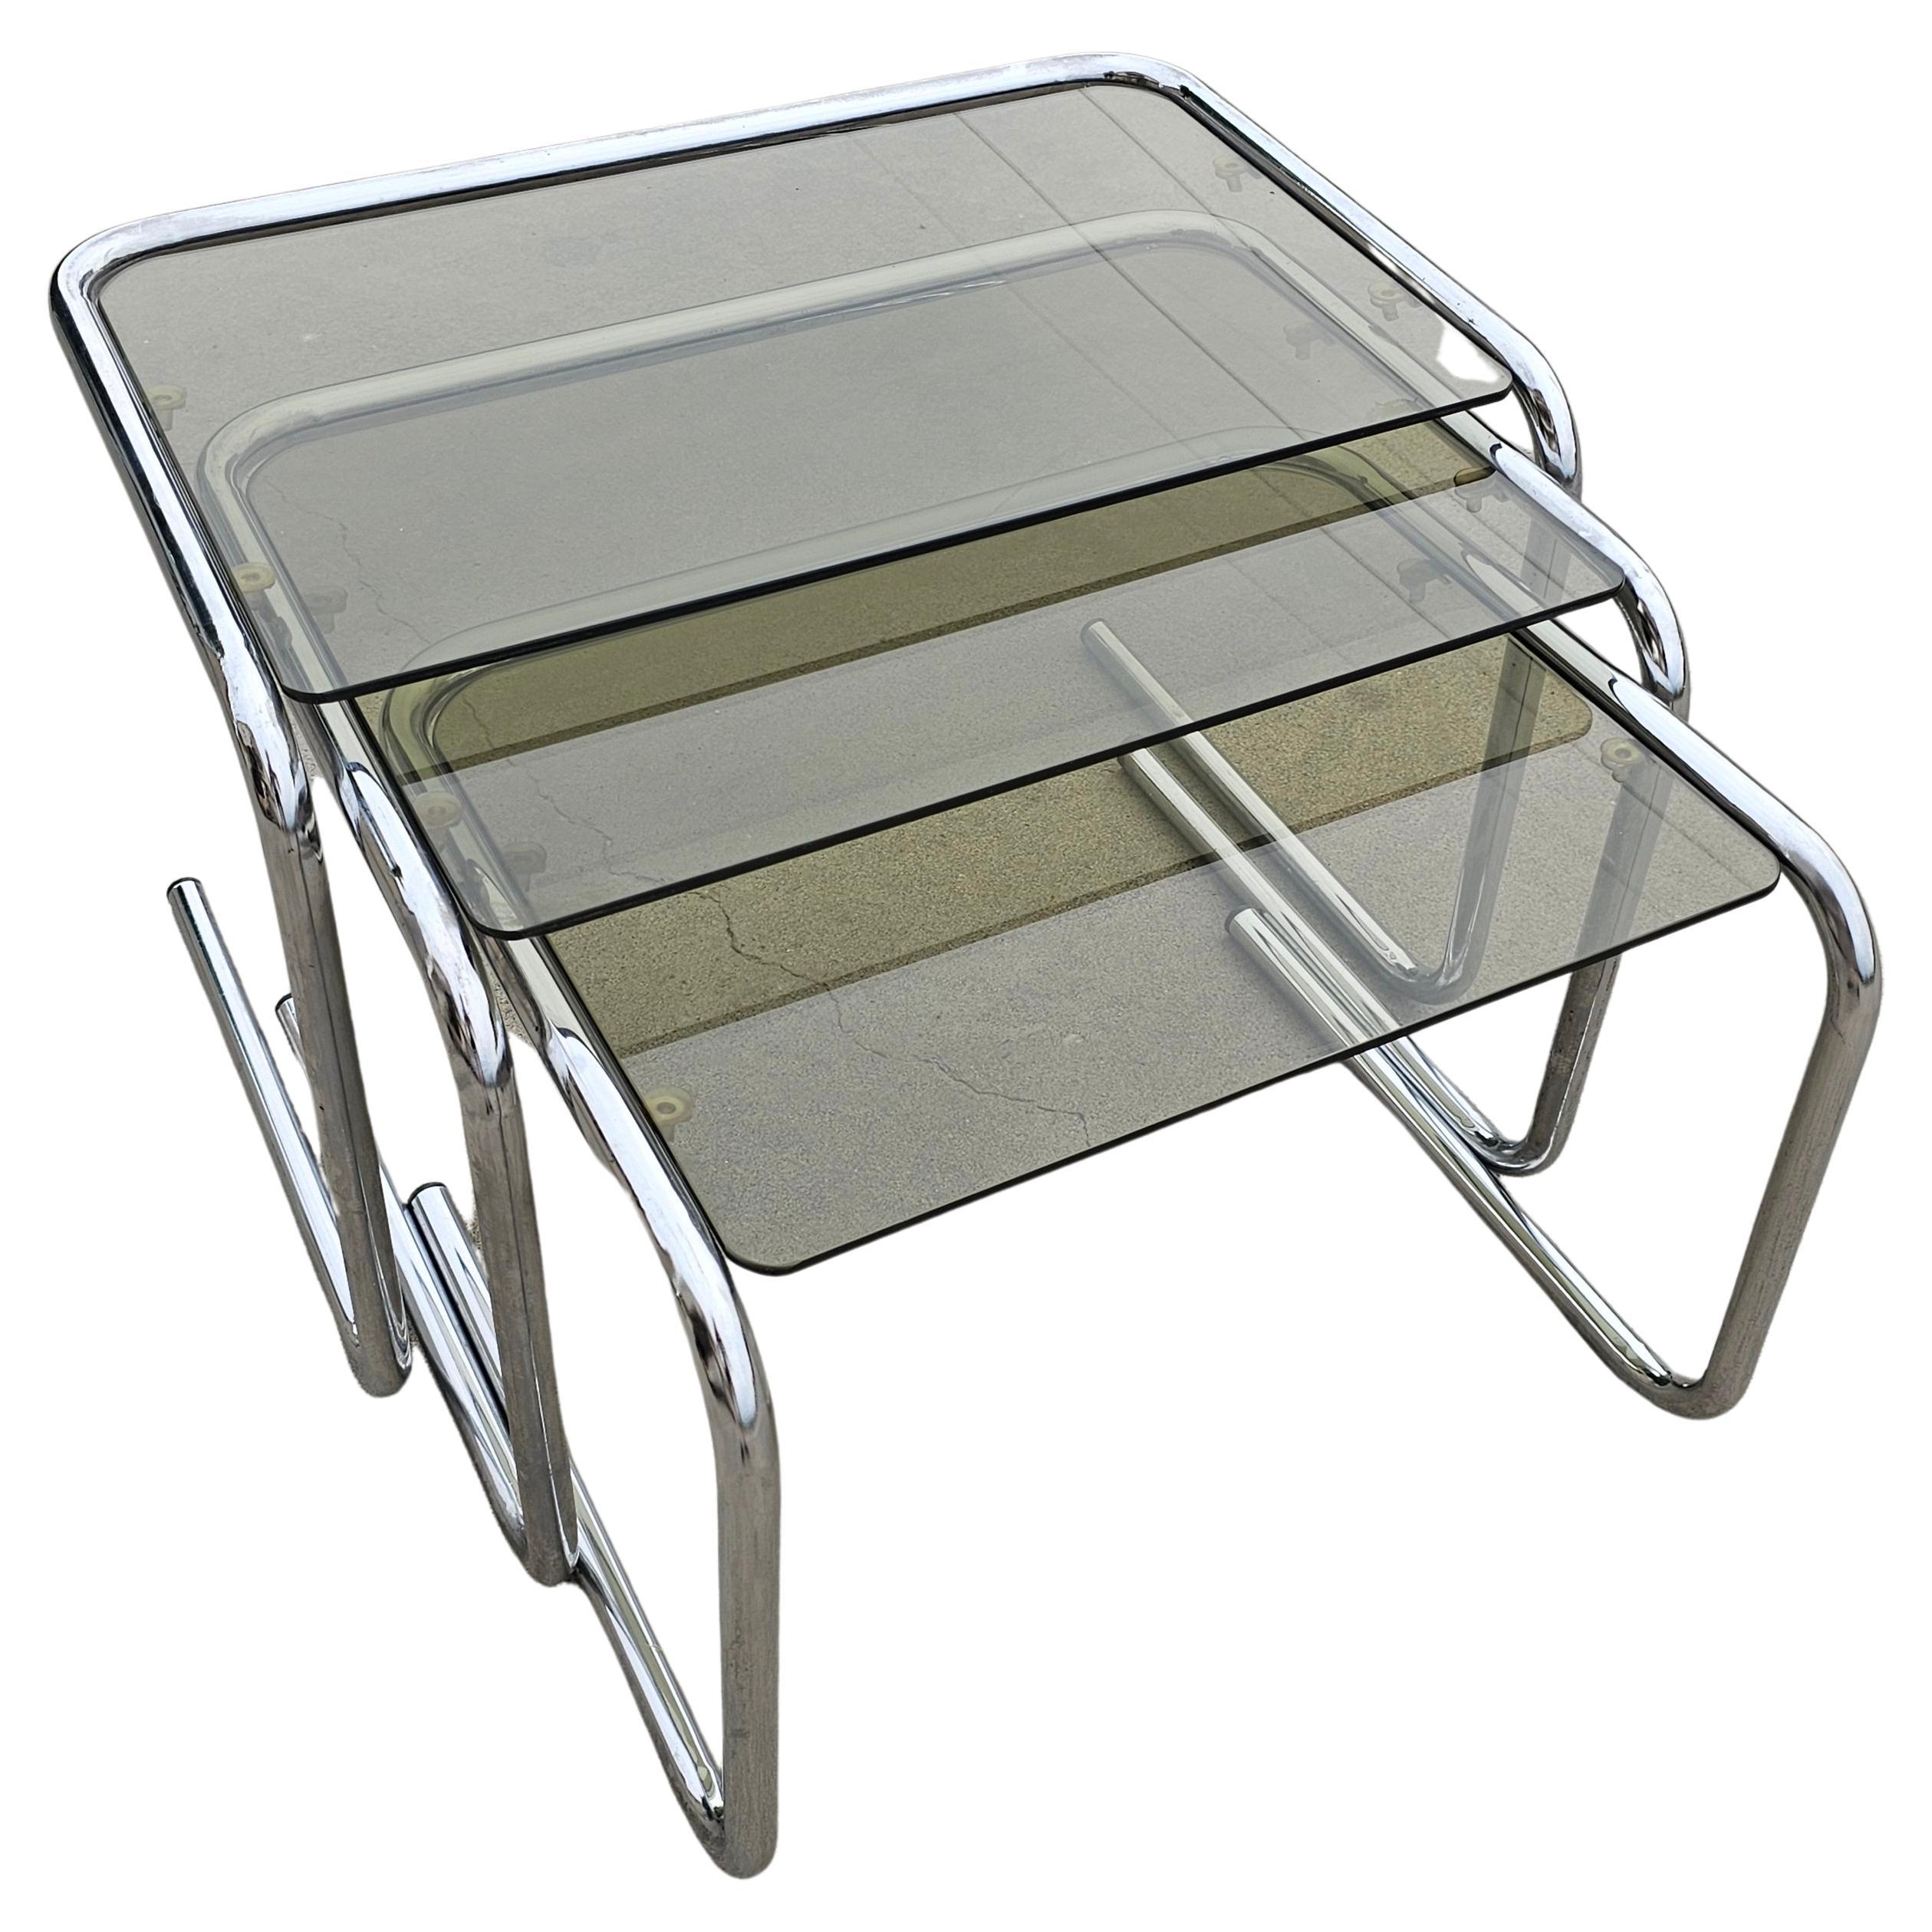 Milo Baughman style Chrome and Smoked Glass Nesting Tables, Italy 1970s